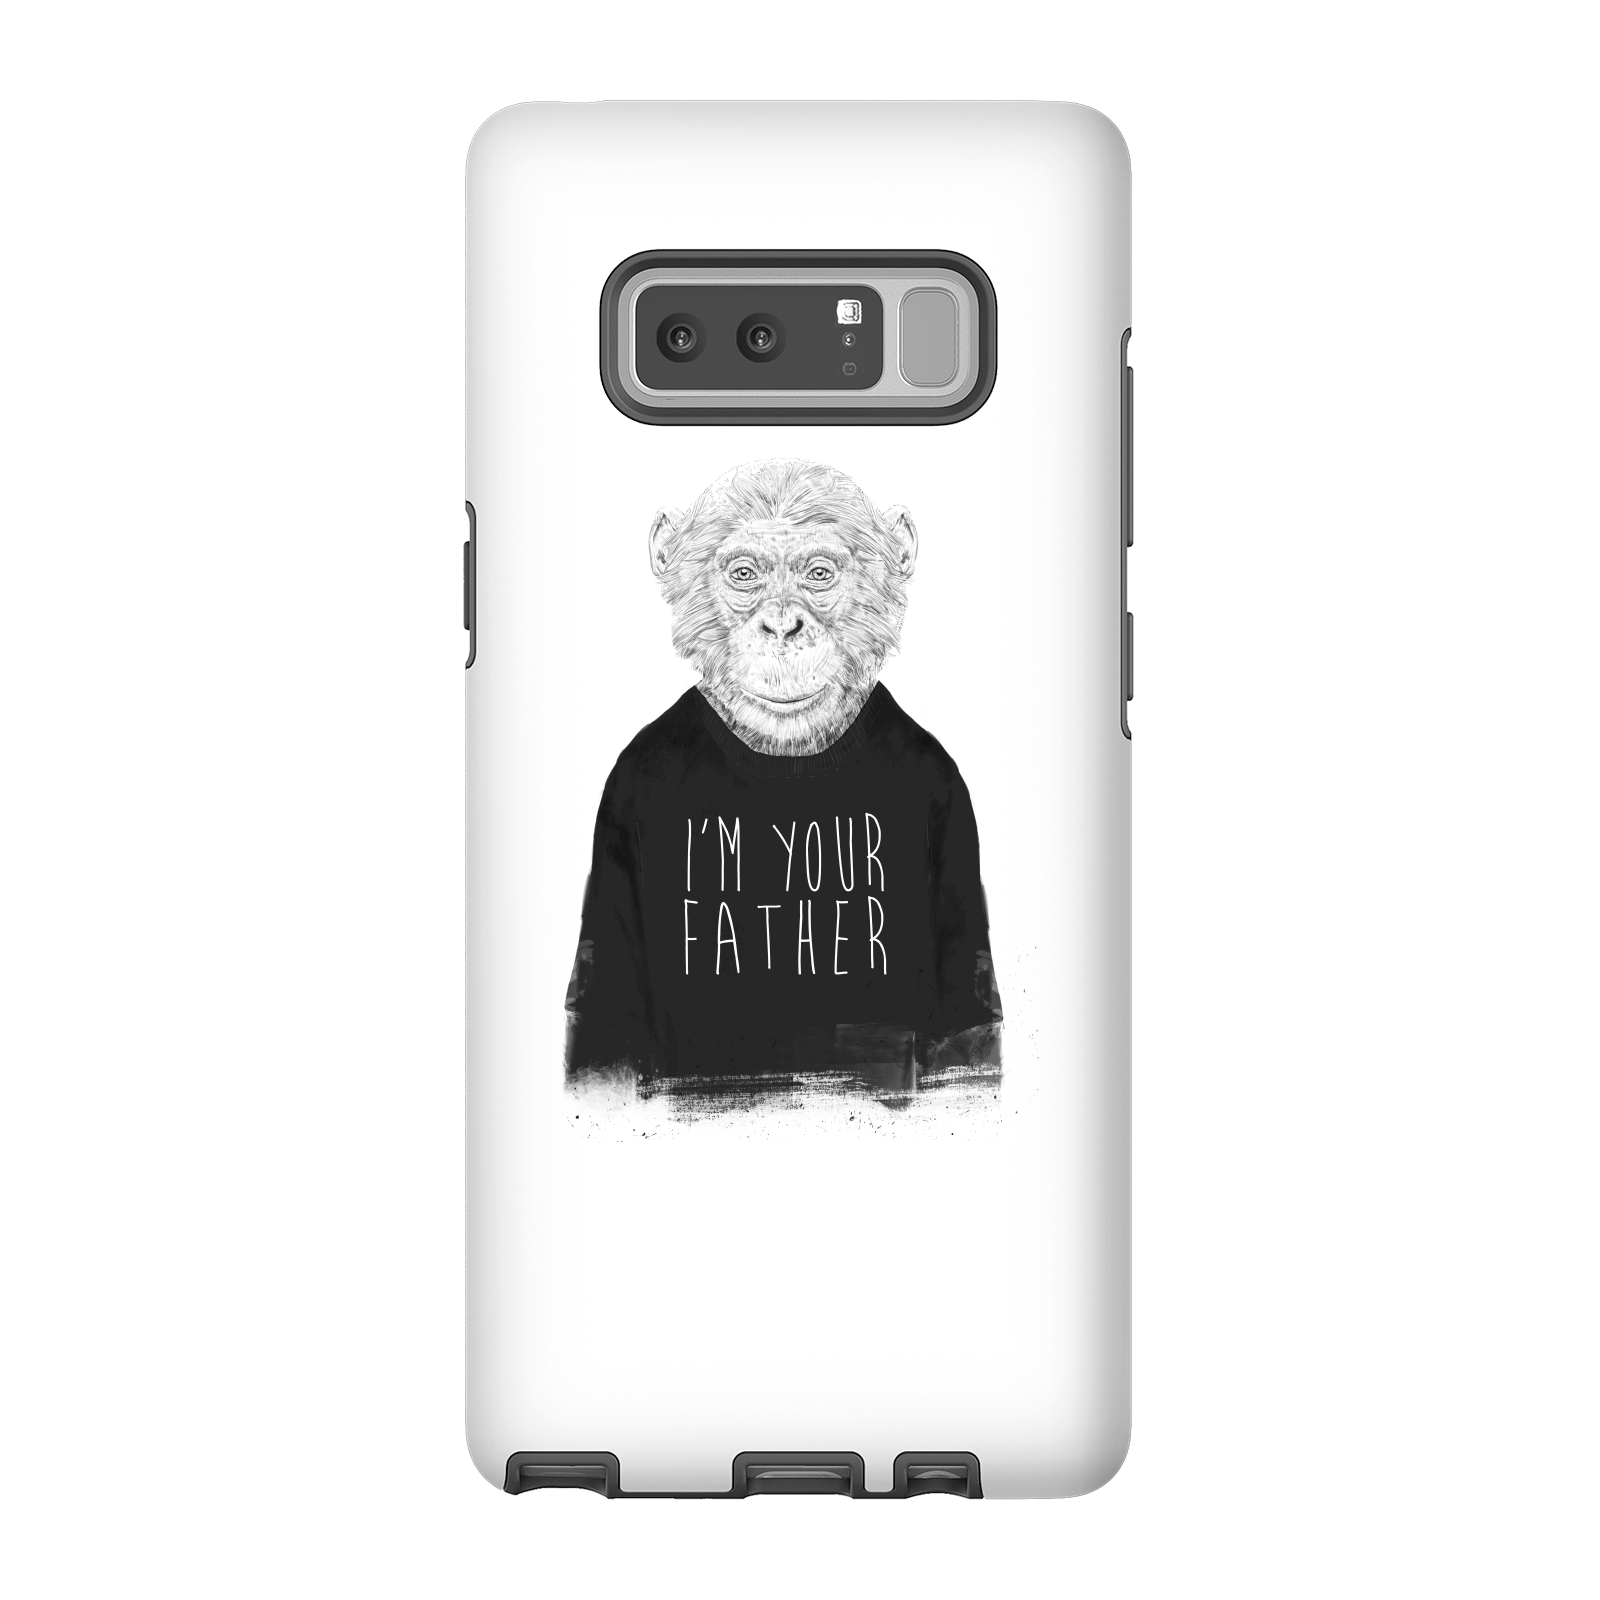 Balazs Solti I'm Your Father Phone Case for iPhone and Android - Samsung Note 8 - Tough Case - Gloss